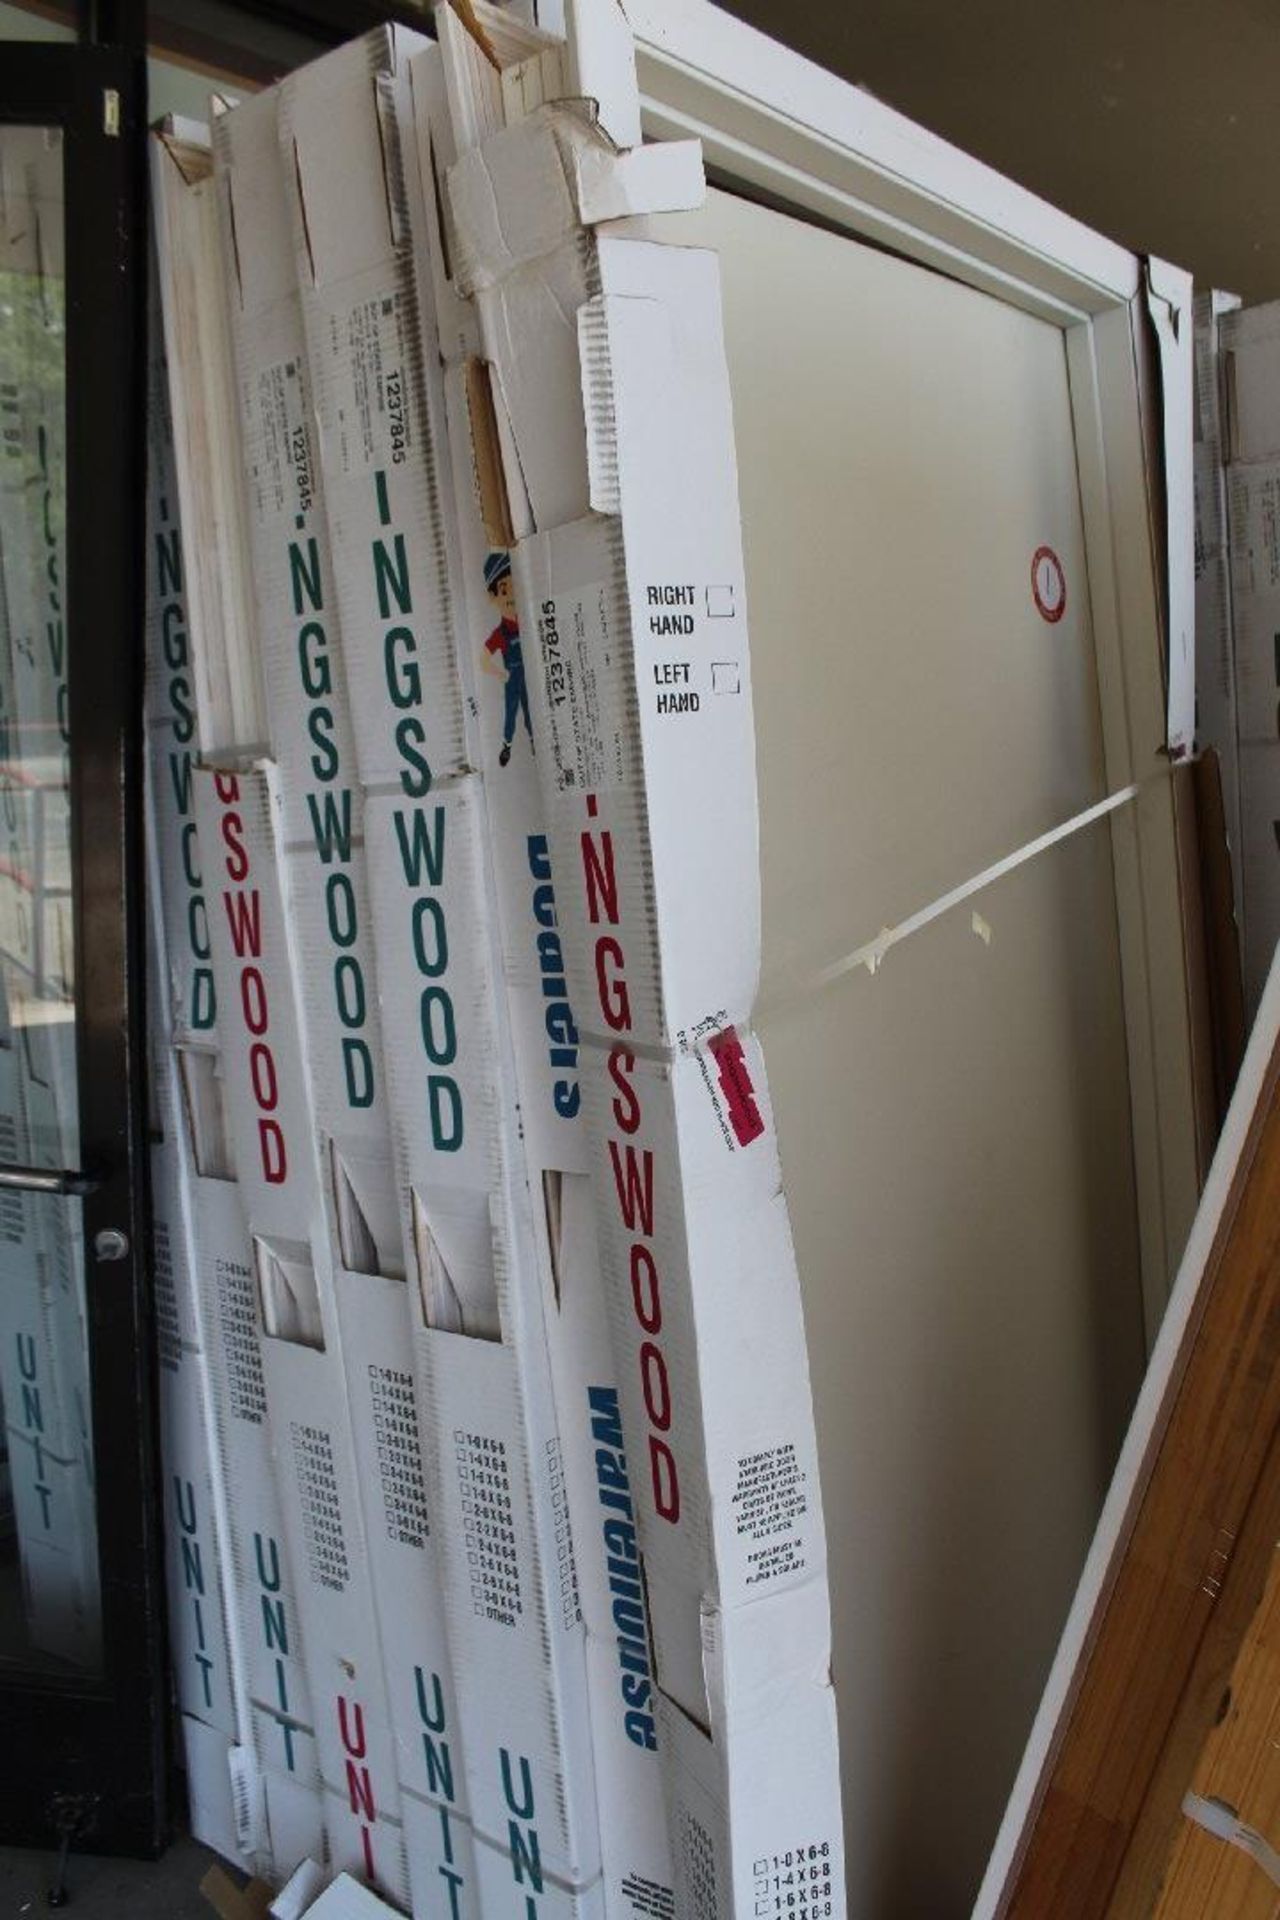 Kingswood 36 Inch Interior doors, Primed White, Quantity of 11 ( 9 Left hand, 2 Right Hand).